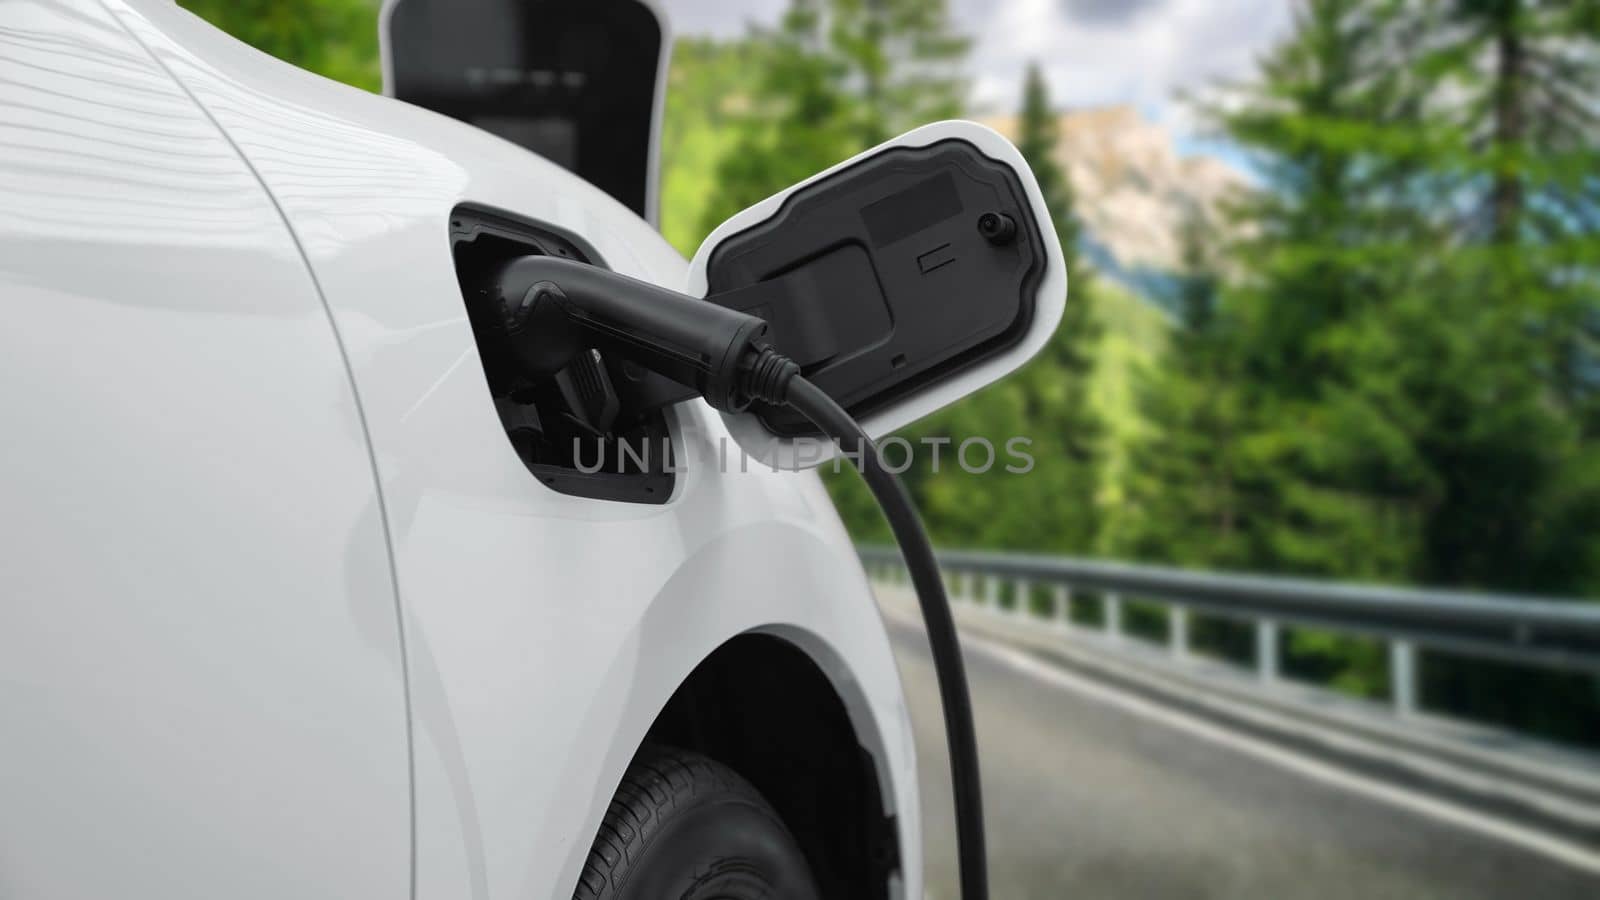 Progressive travel concept of electric vehicle stop to recharge energy from charging station at remote area before reach destination, EV car powered by renewable and clean energy for green environment